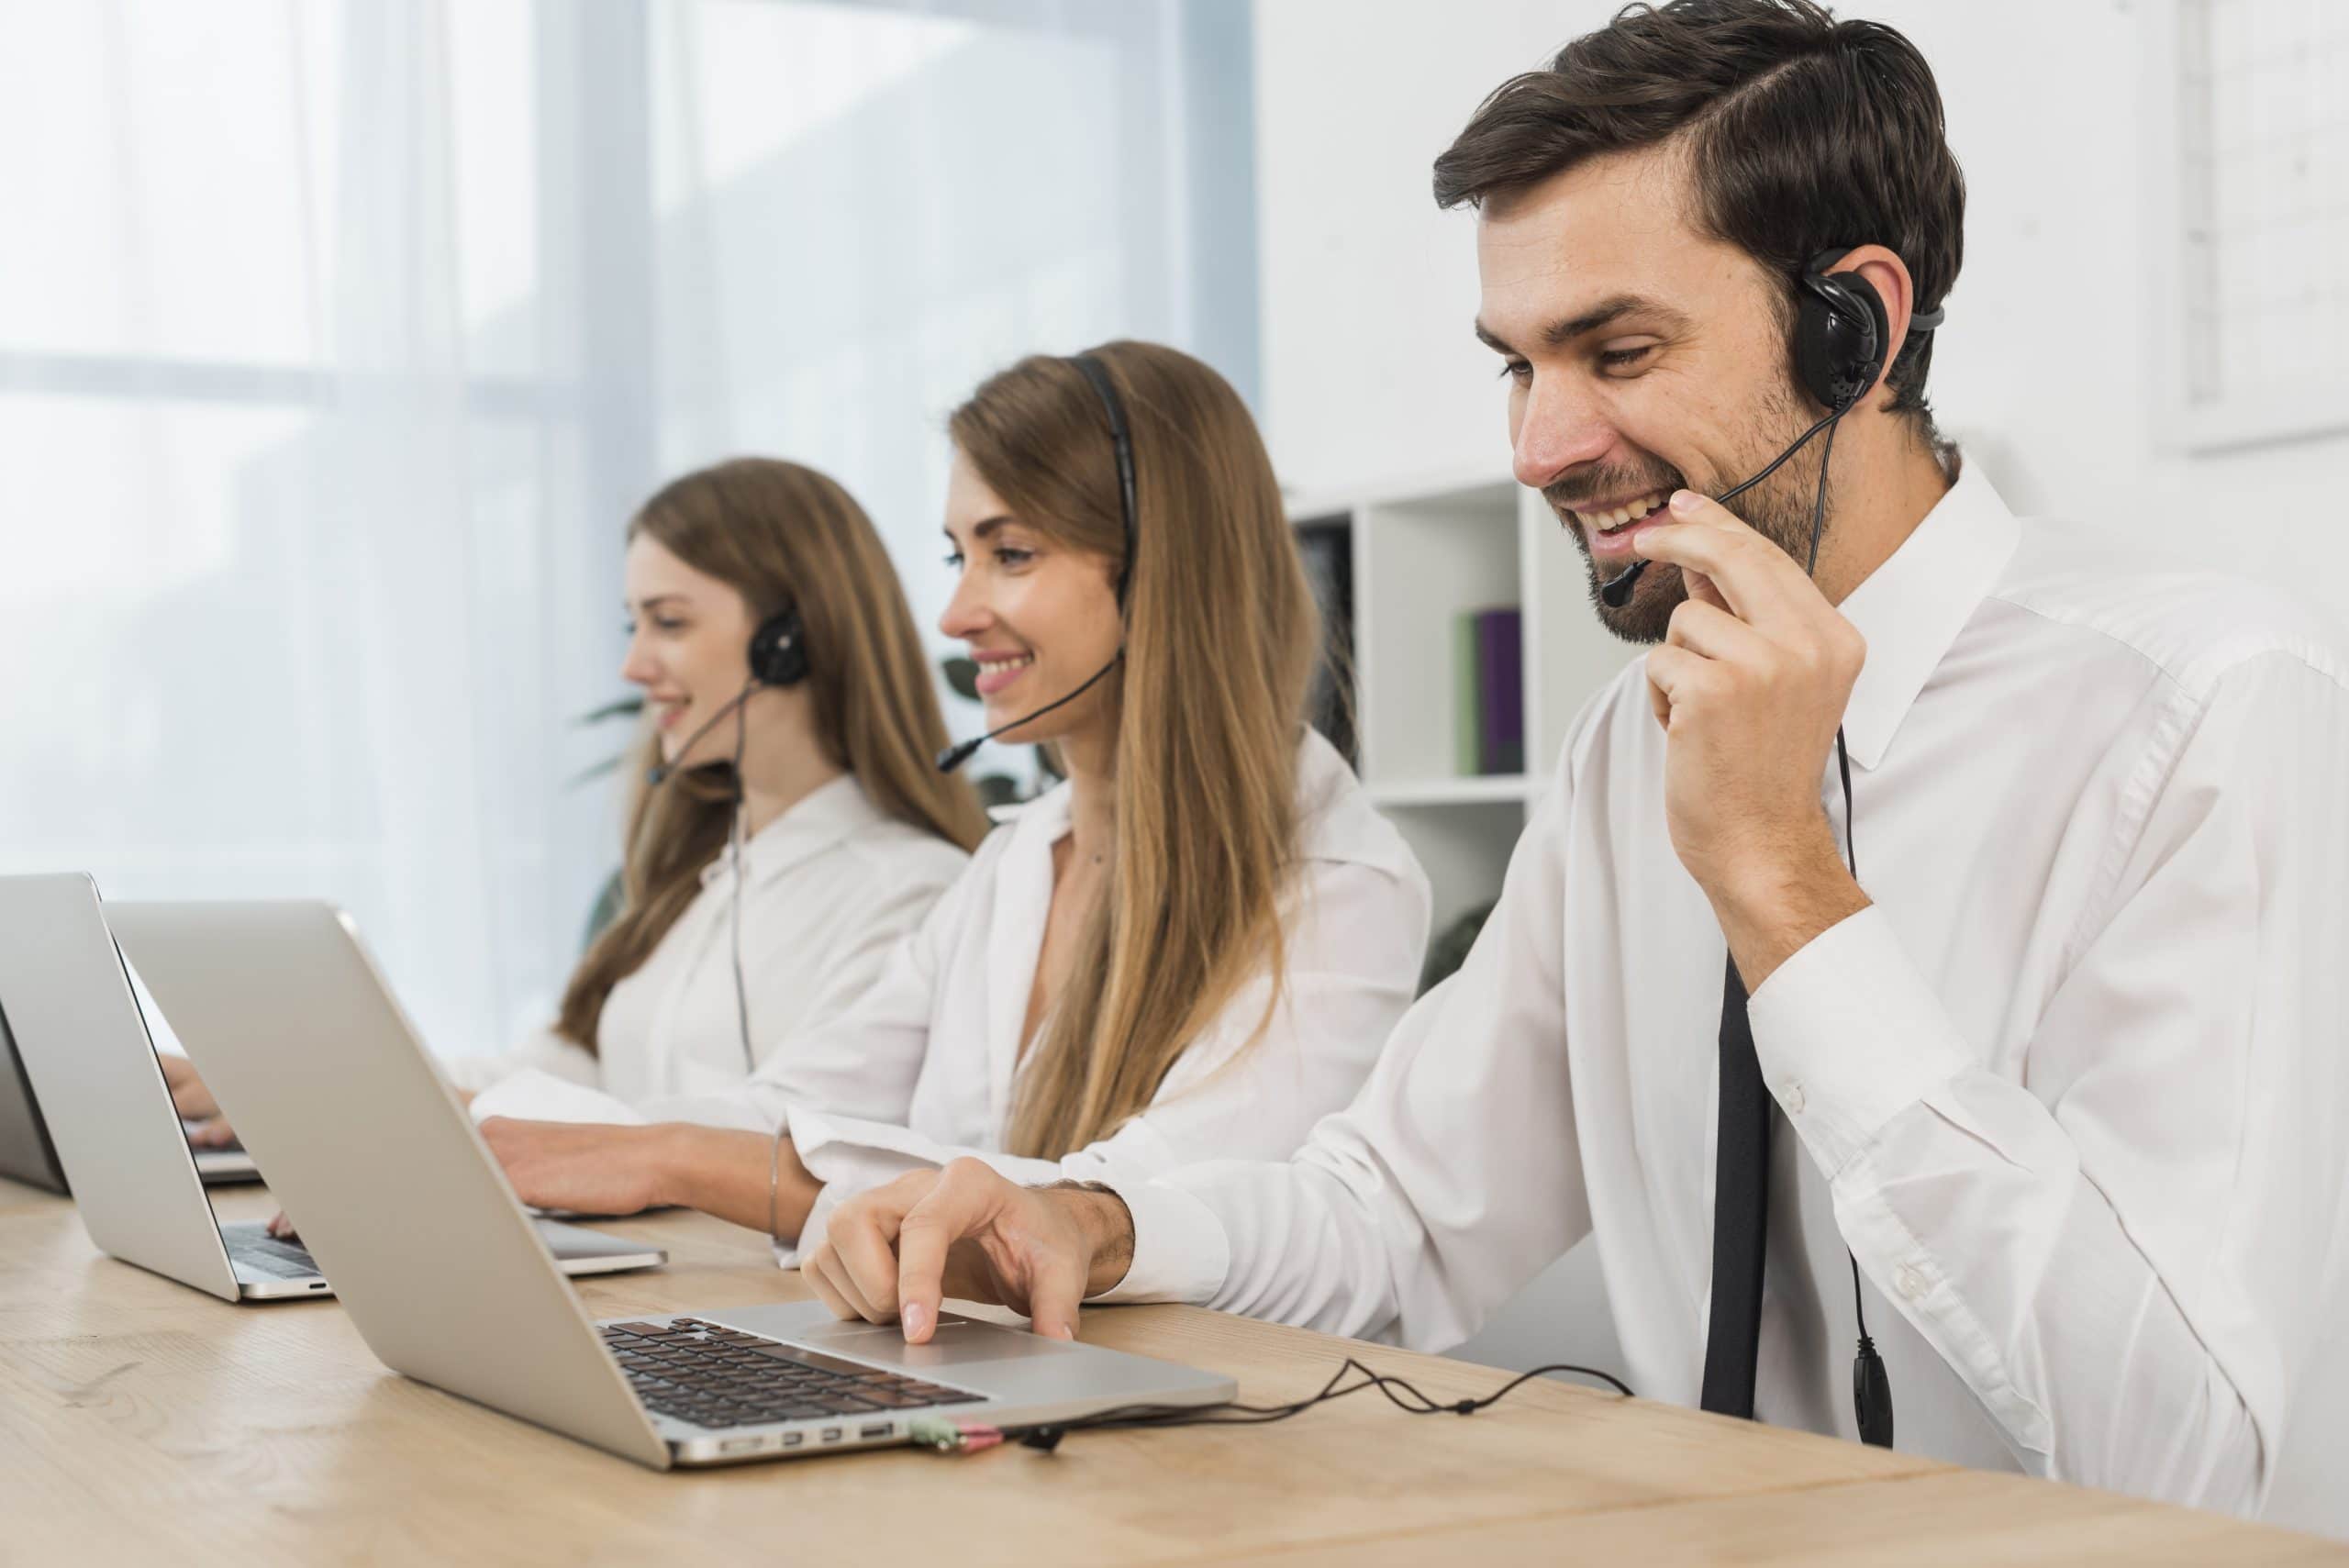 Can outsourcing customer service help your businesses? Click here to learn more about it from Pure Moderation.
